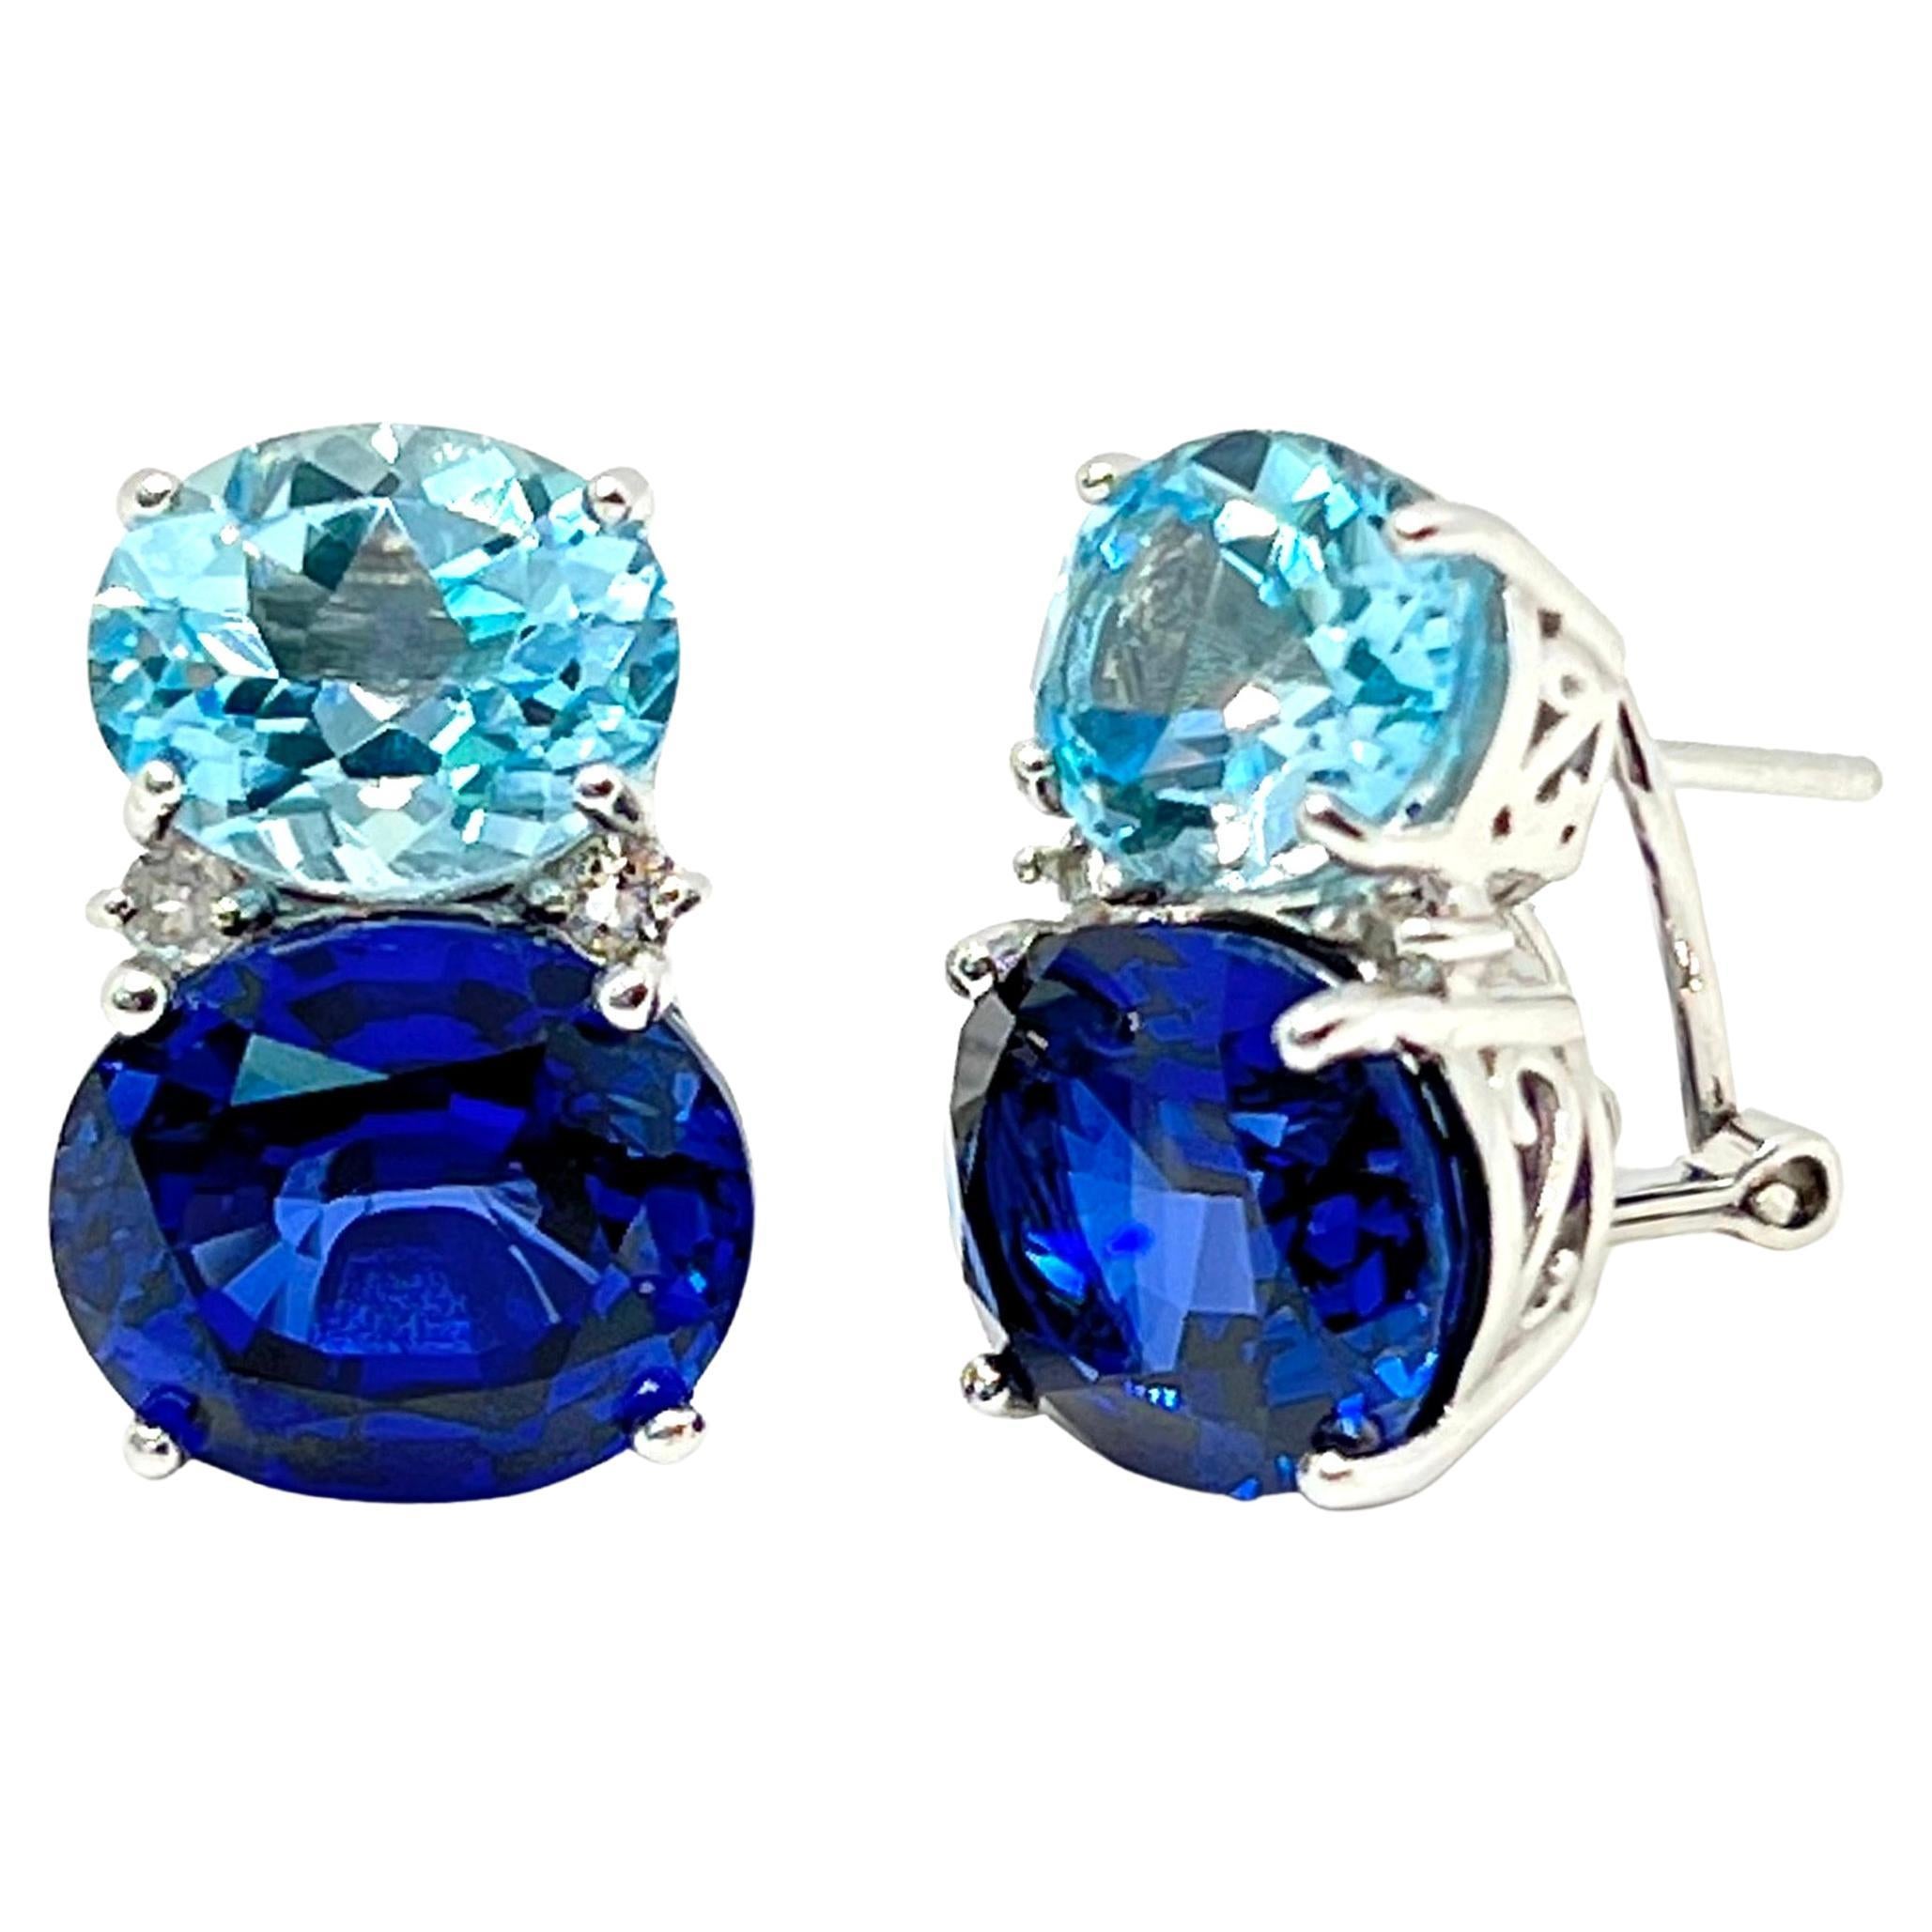 Stunning Double Oval Blue Topaz & Sapphire Earrings For Sale